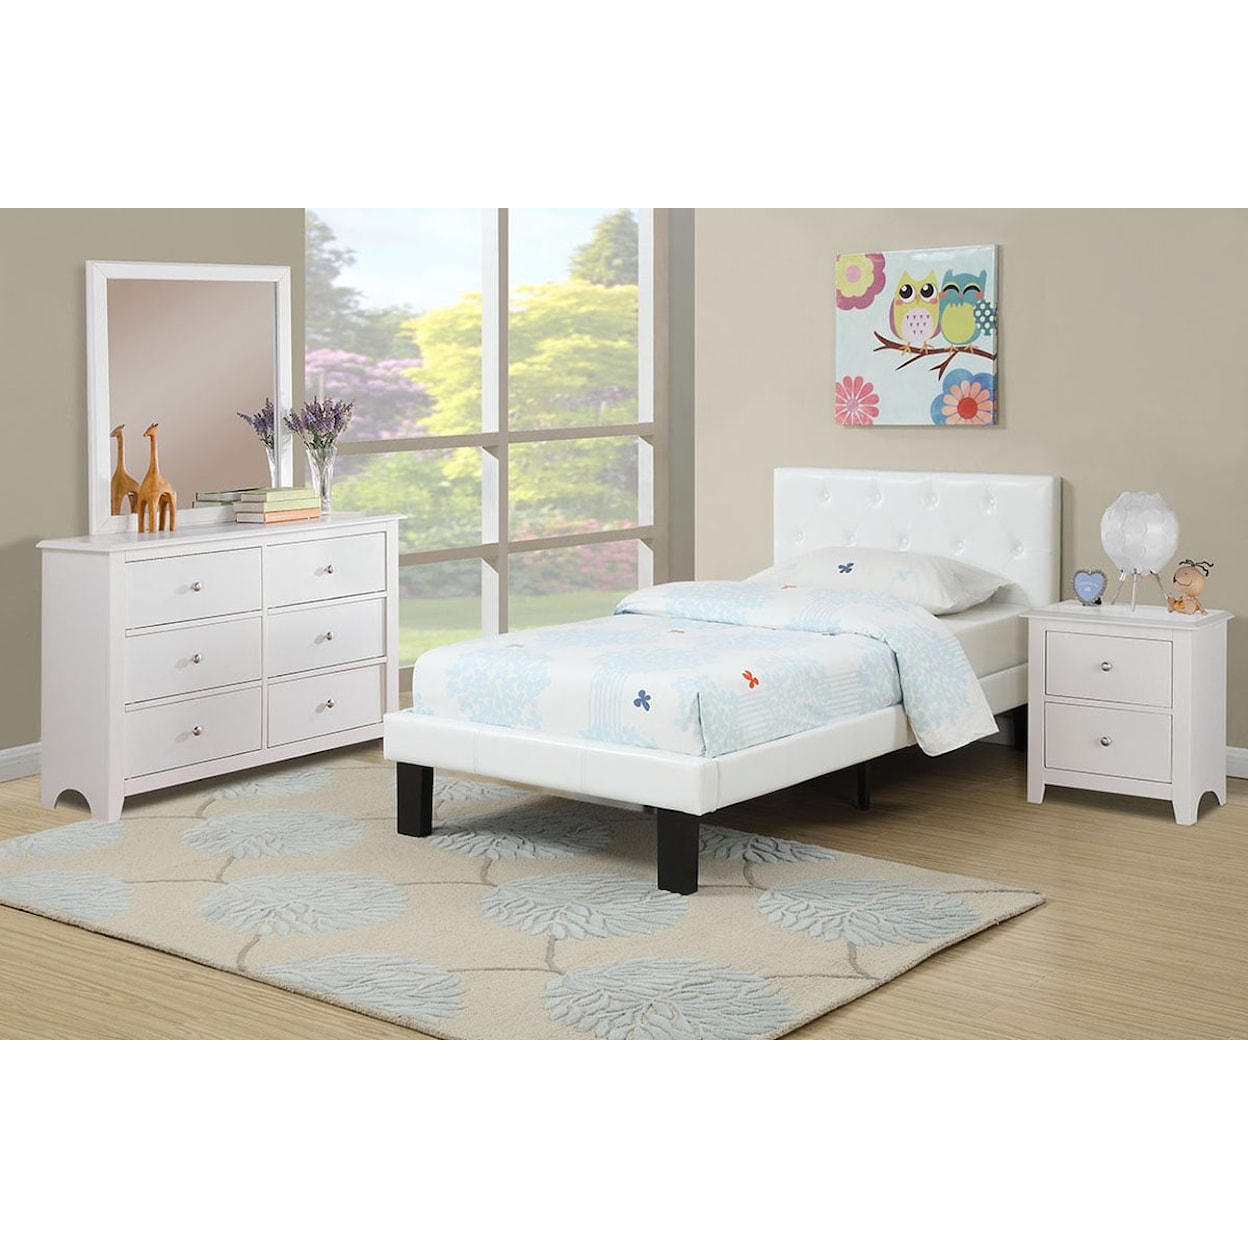 Poundex Twin/Full Beds WHITE FULL BED W/ SLATS |